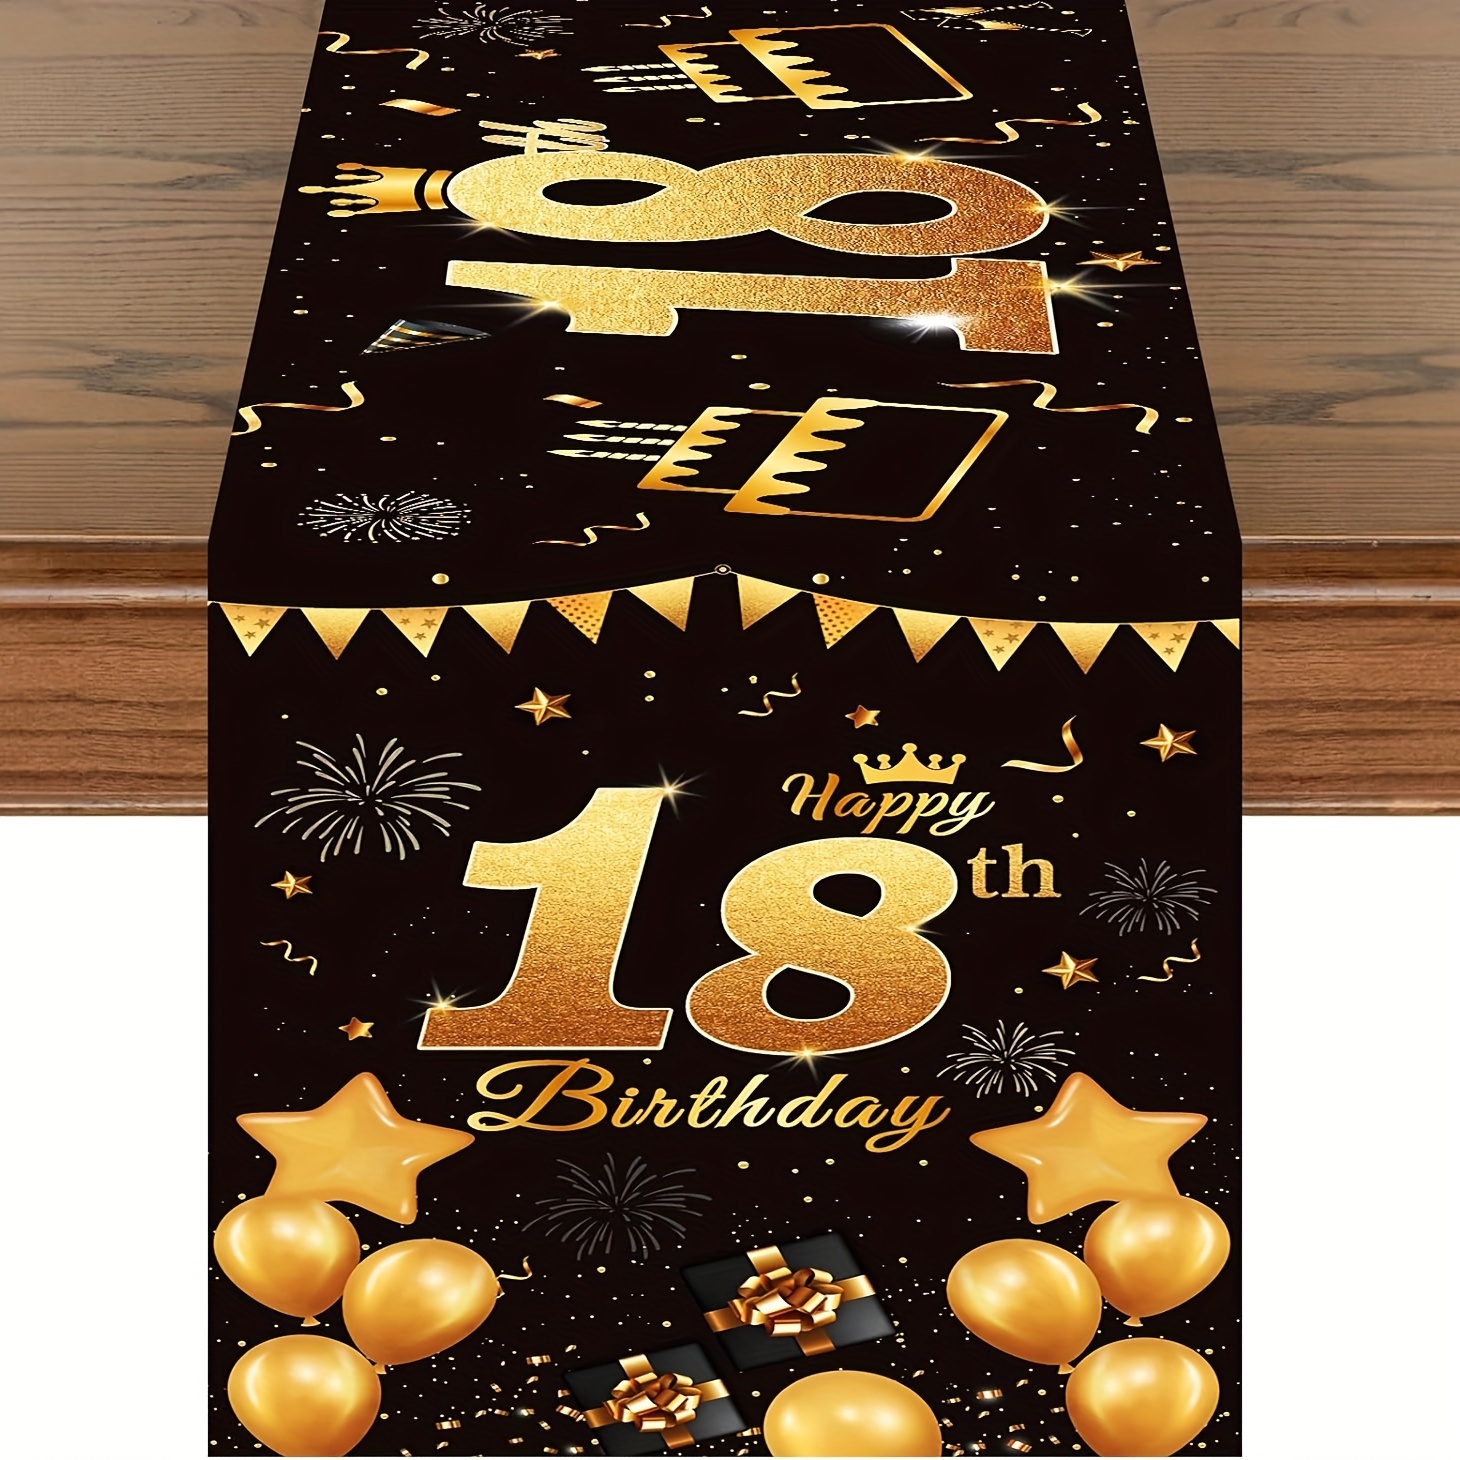 

1pc Table Cloth, Polyester Table Runner, Happy 18th Birthday Black And Golden Design Table Cloth, Non-slip Fade Resistant Table Runner, For 18th Birthday Party Decor, Table Decor, Home Supplies